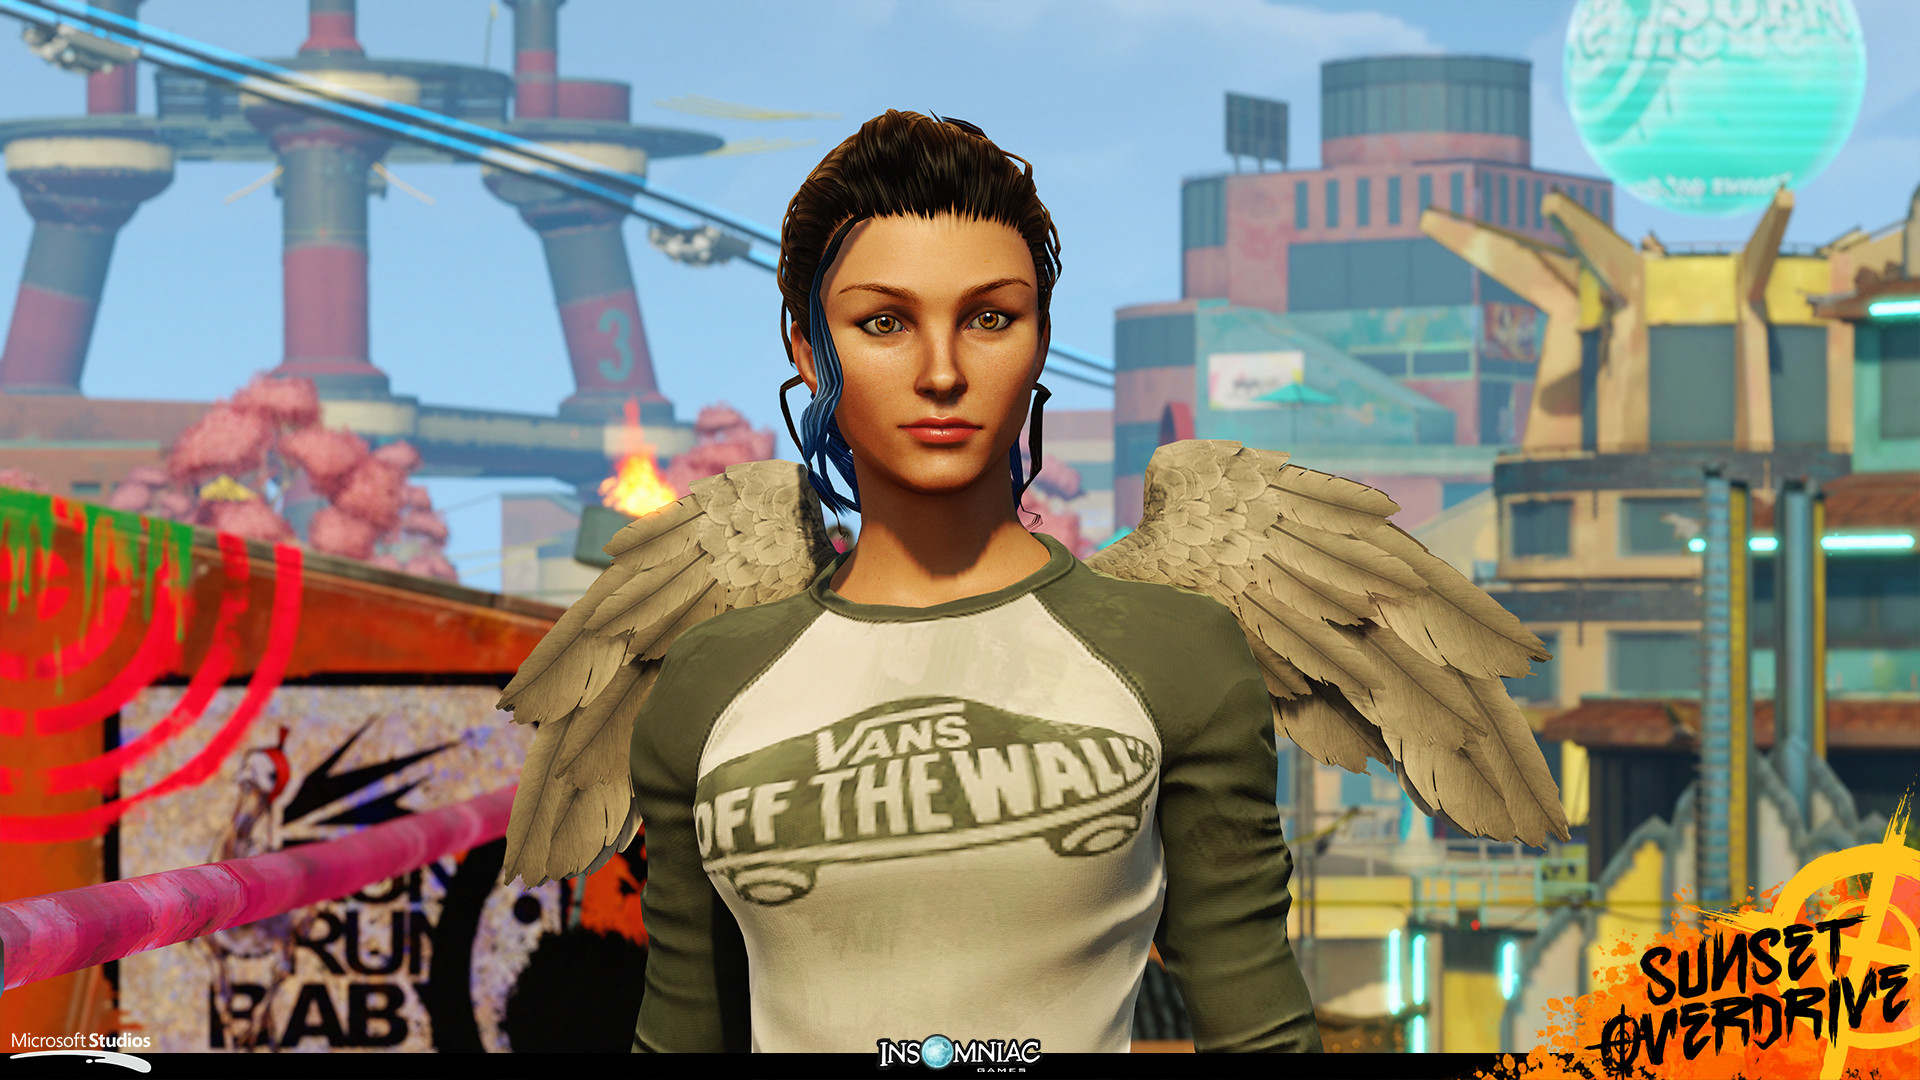 Sunset Overdrive: Play As Female, Throws Shade at Ubisoft